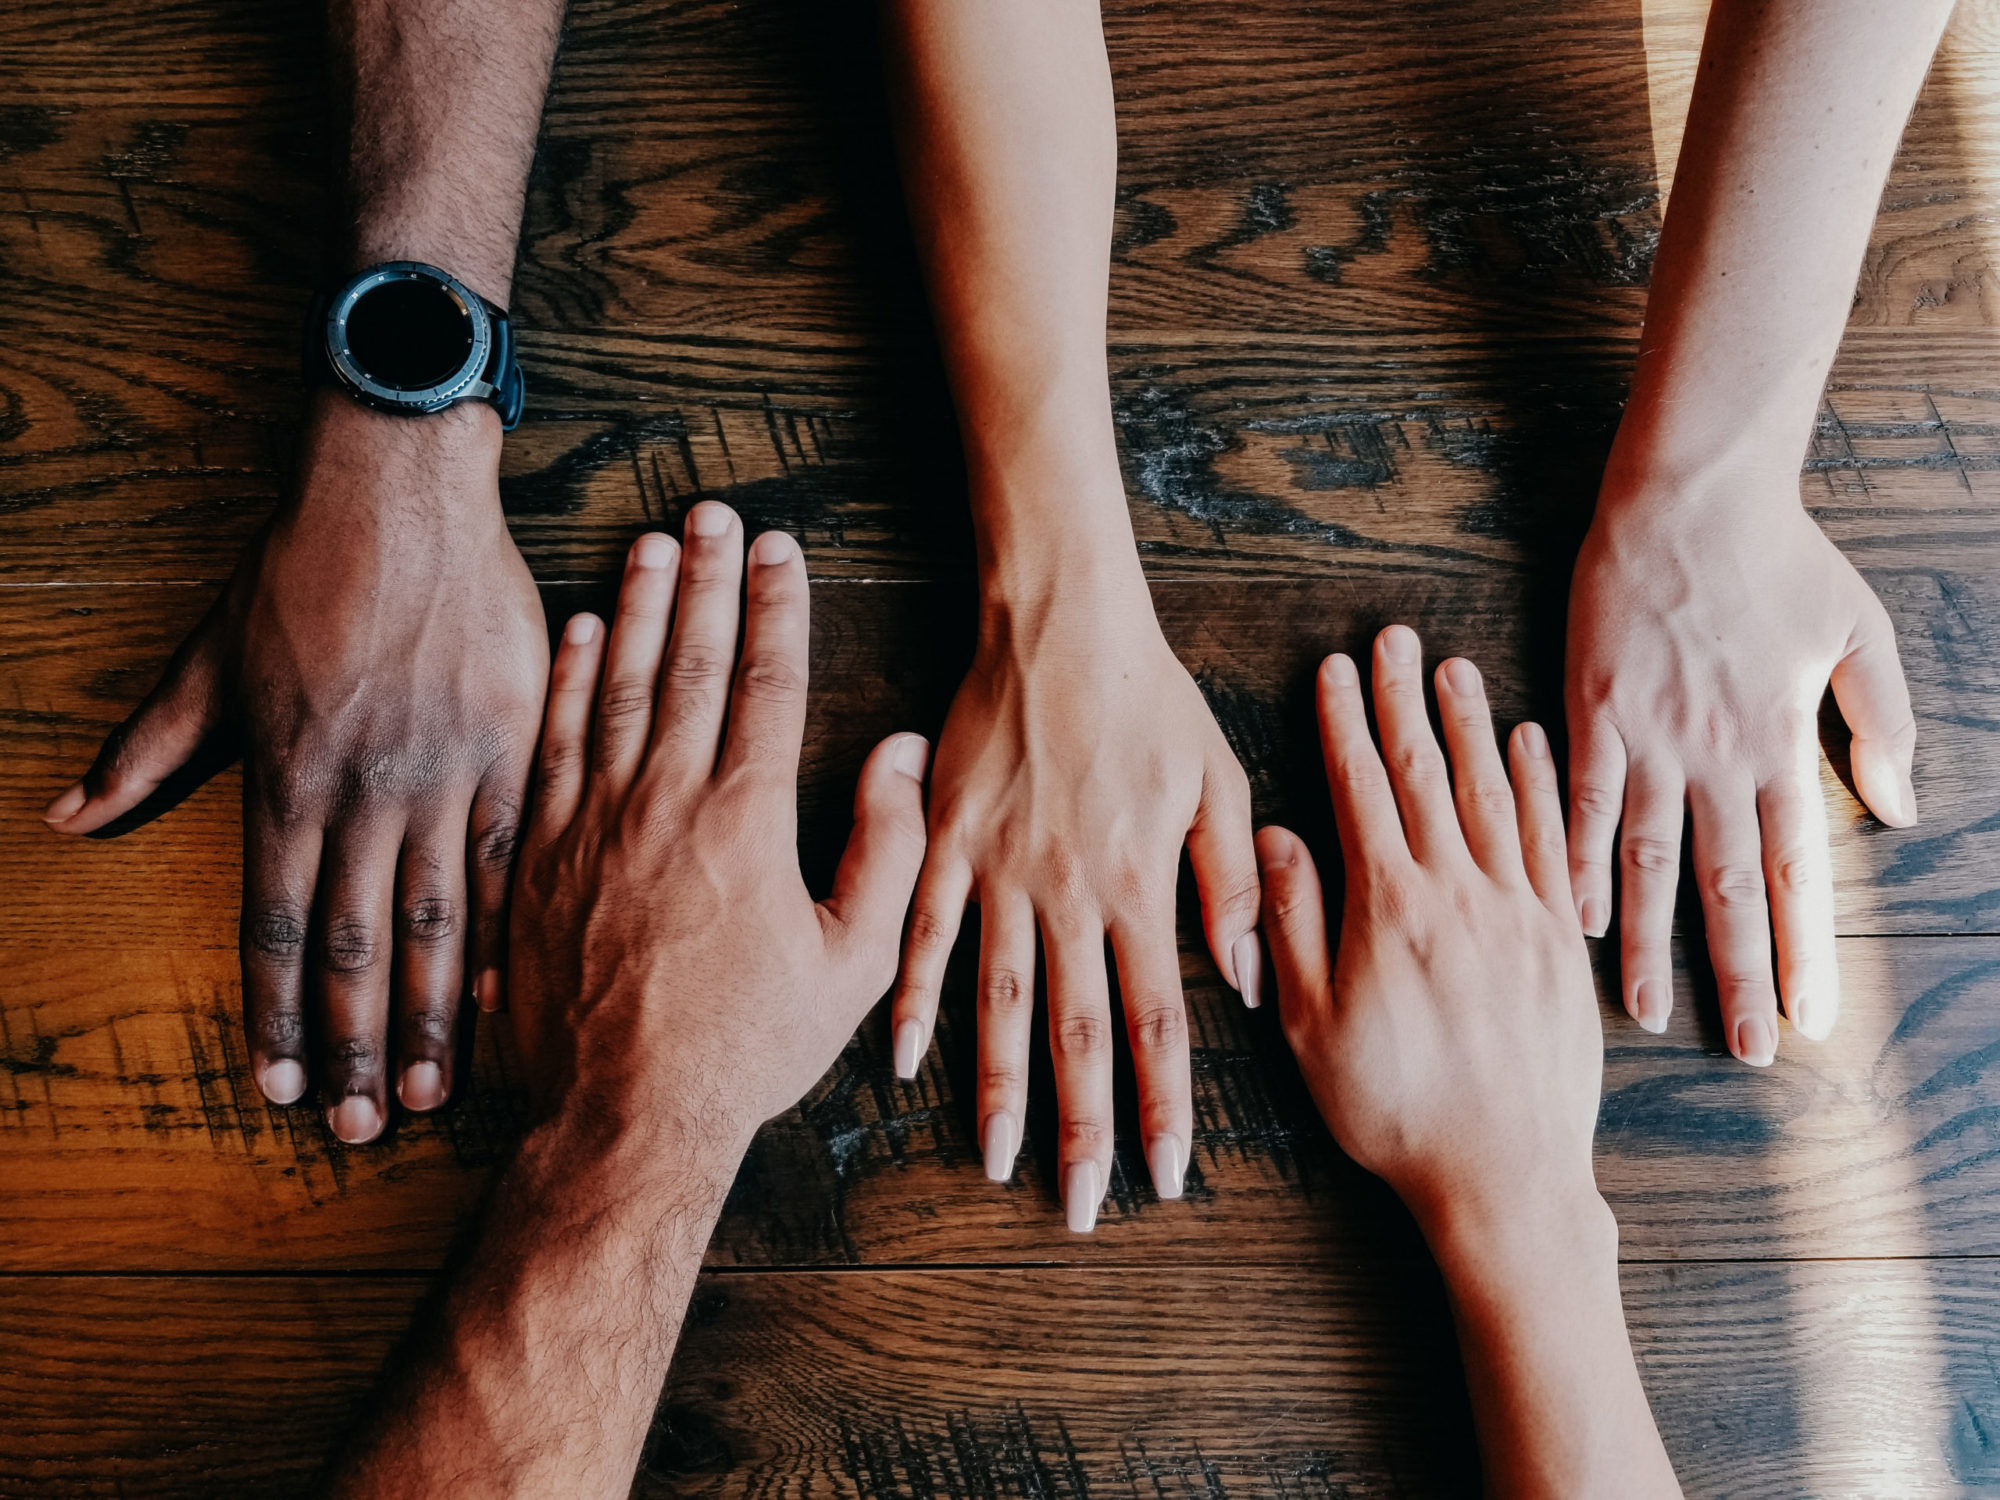 Hands of people from different races are laid next to each other in alternating directions, with the darkest skin color on the left in a gradient toward the lightest skin on the right.